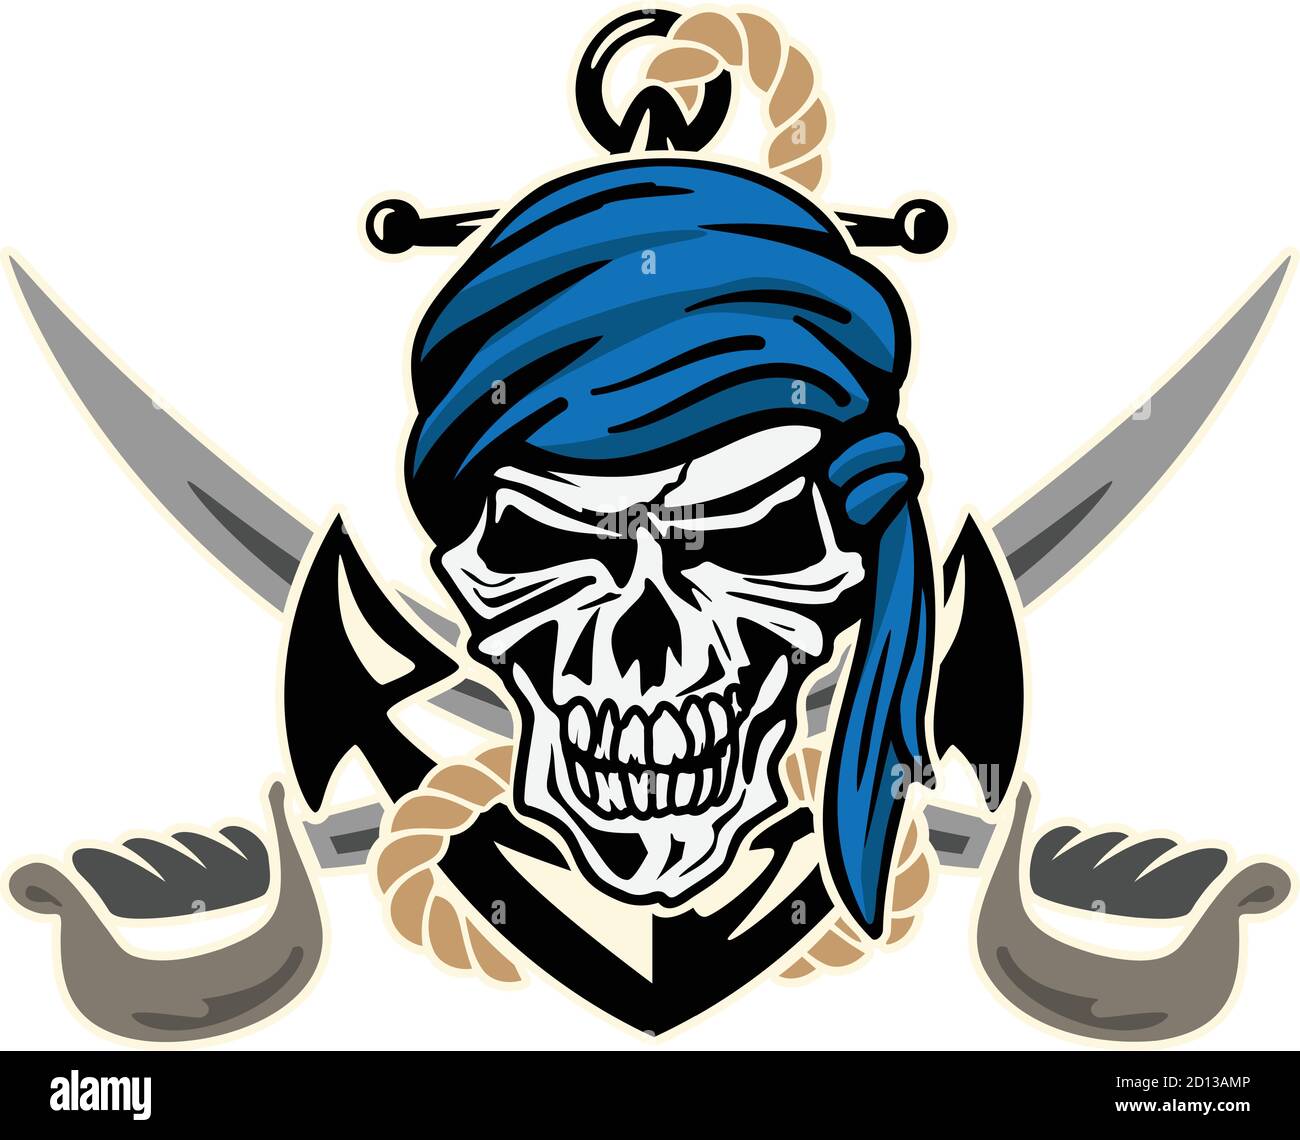 Pirate Skull with Anchor, Rope and Crossed Swords Isolated Vector Illustration Stock Vector